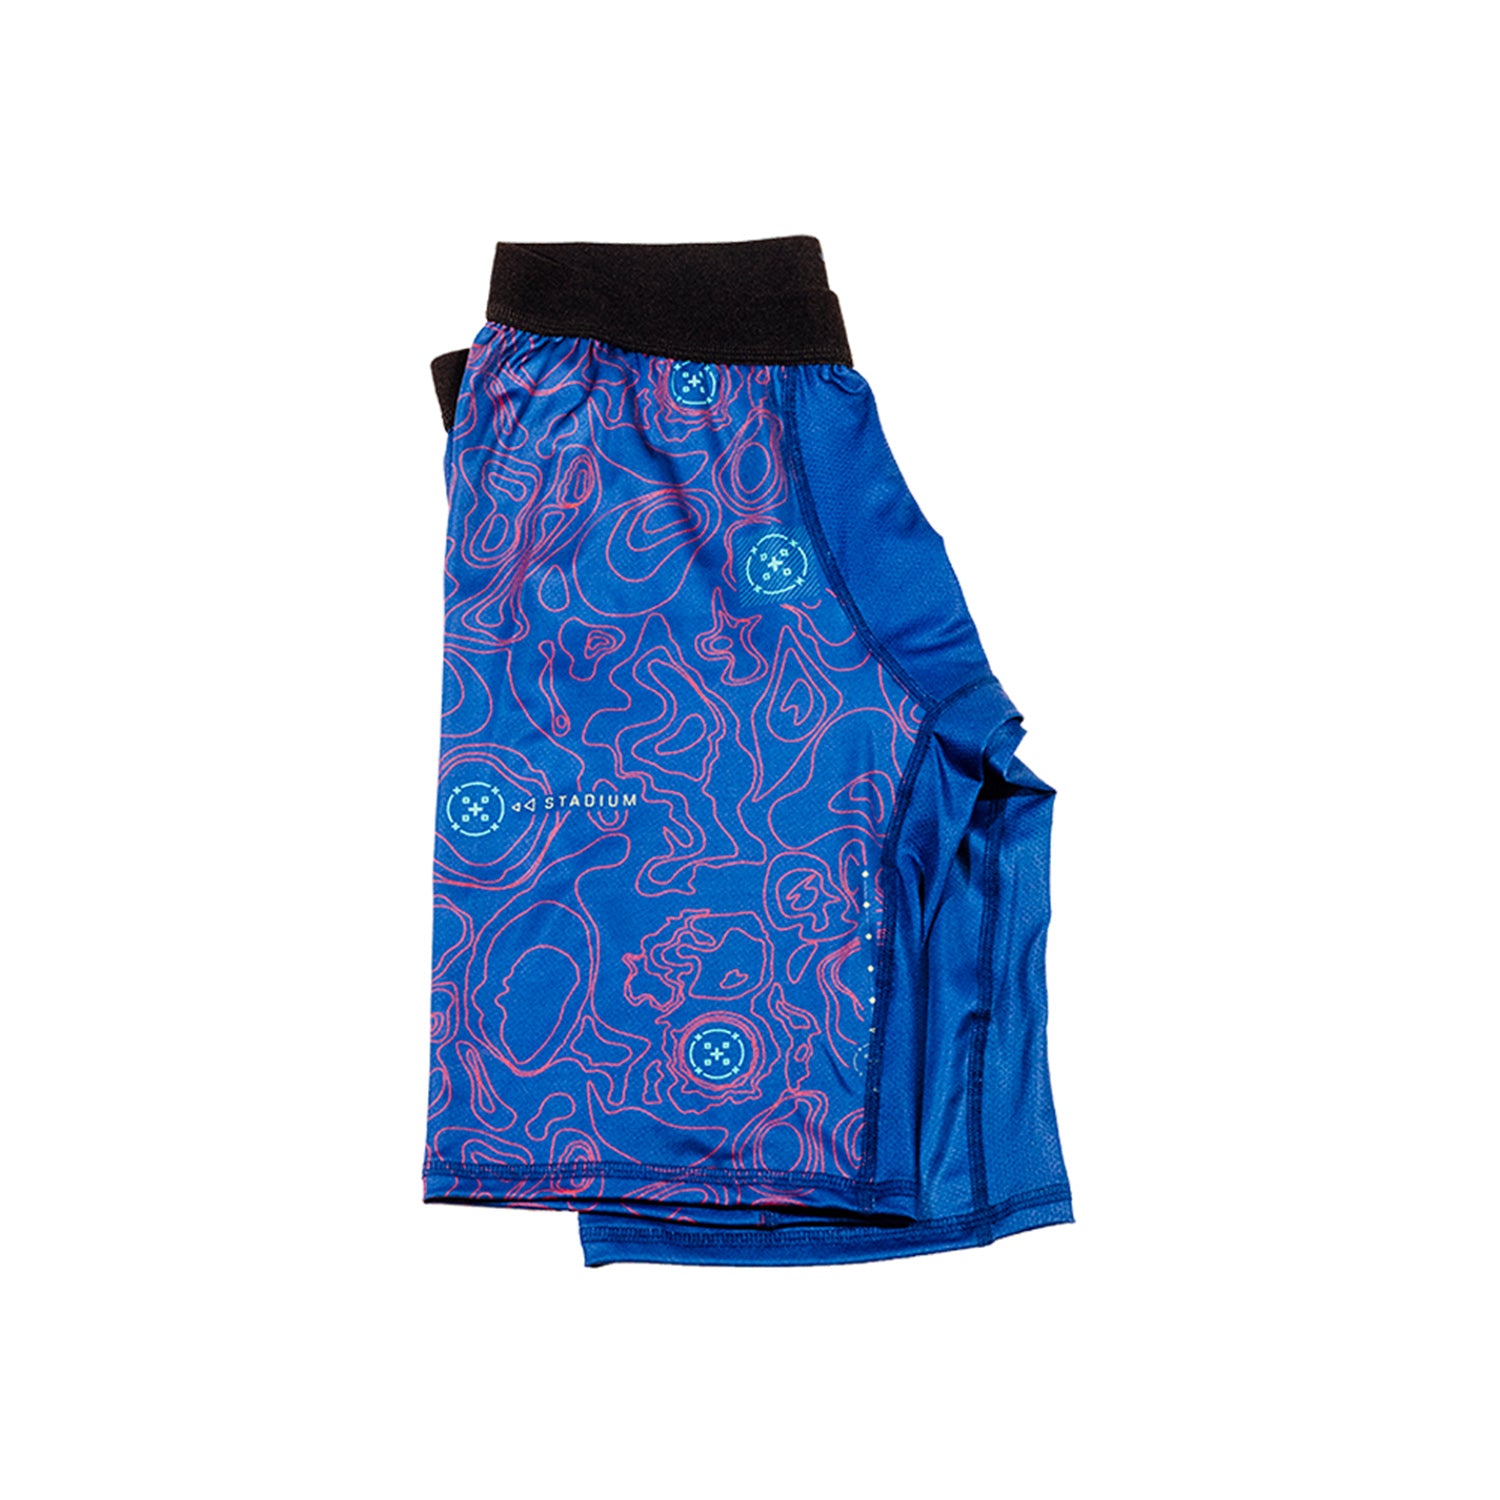 Call of Duty: Warzone Blue Compression Shorts by POINT3